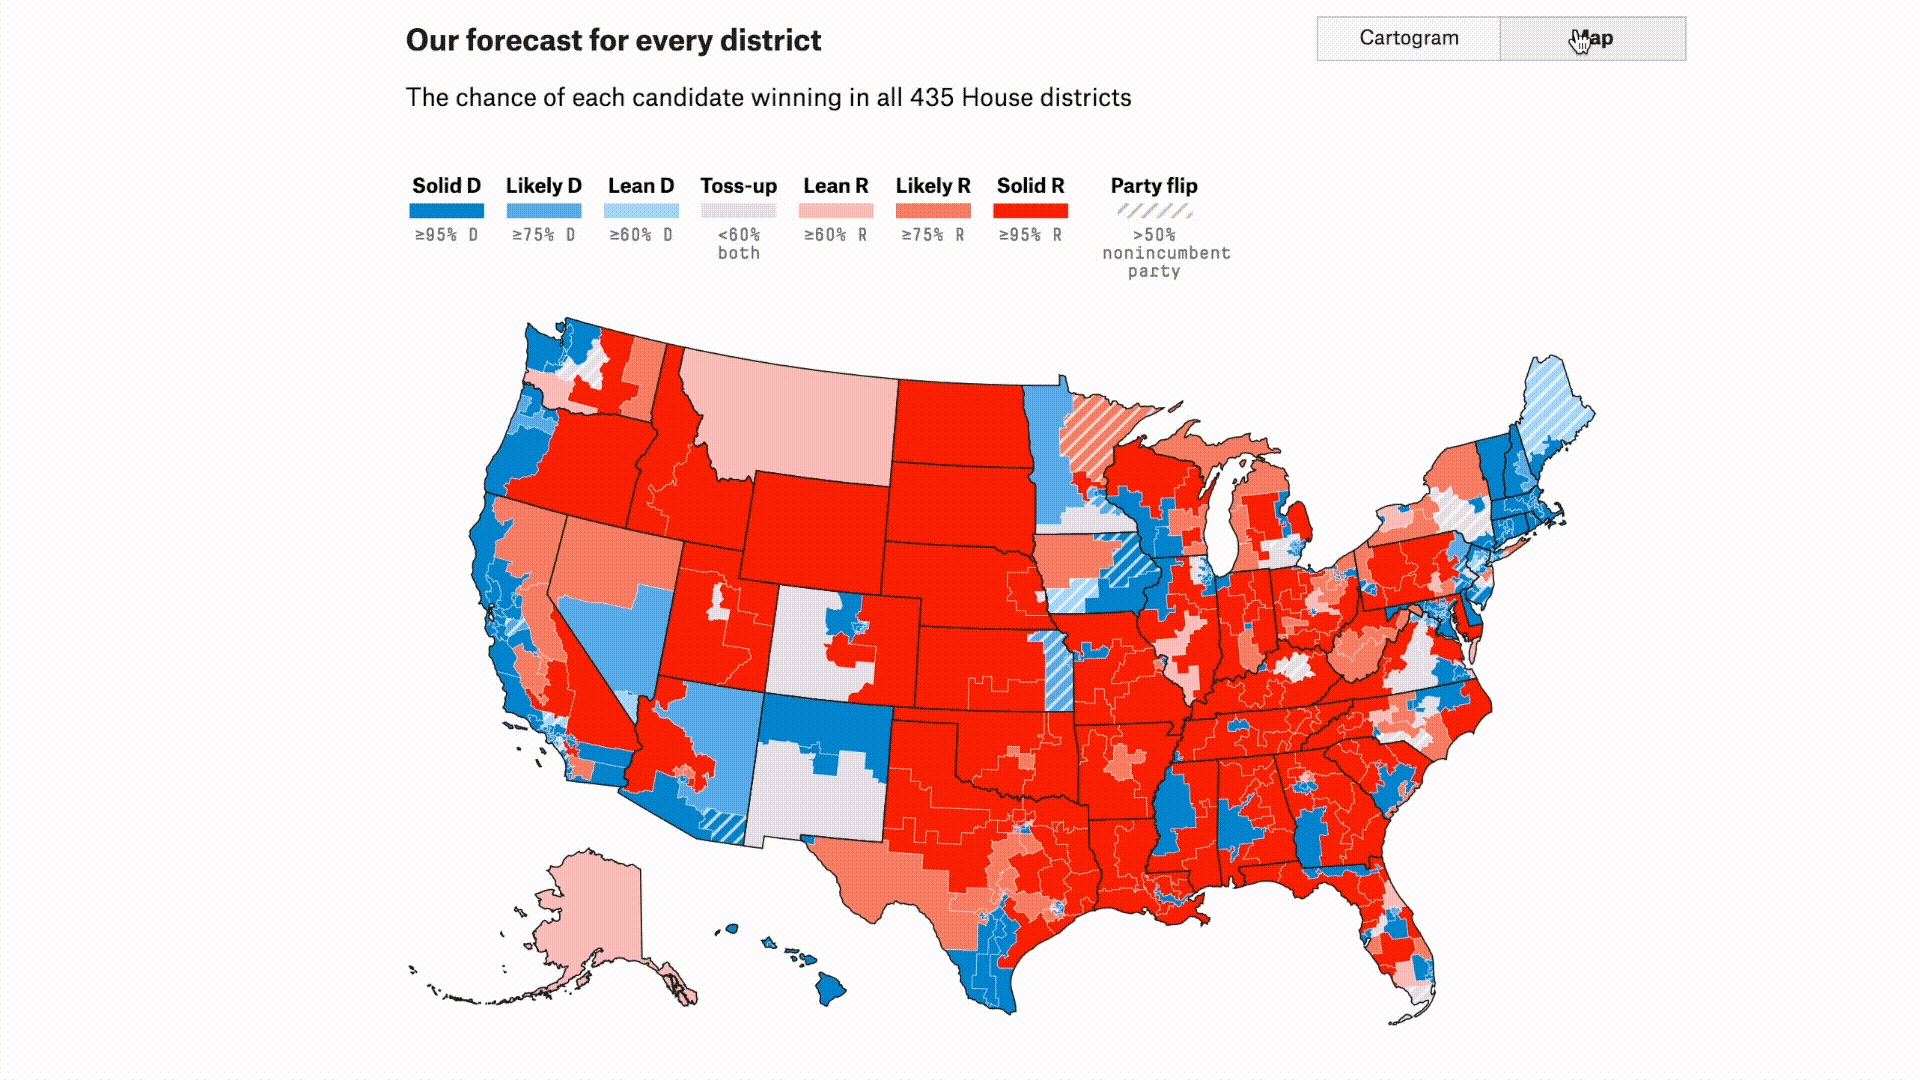 The House Forecast from FiveThirtyEight where the House breakdown is shown on a regular map and a cartogram.